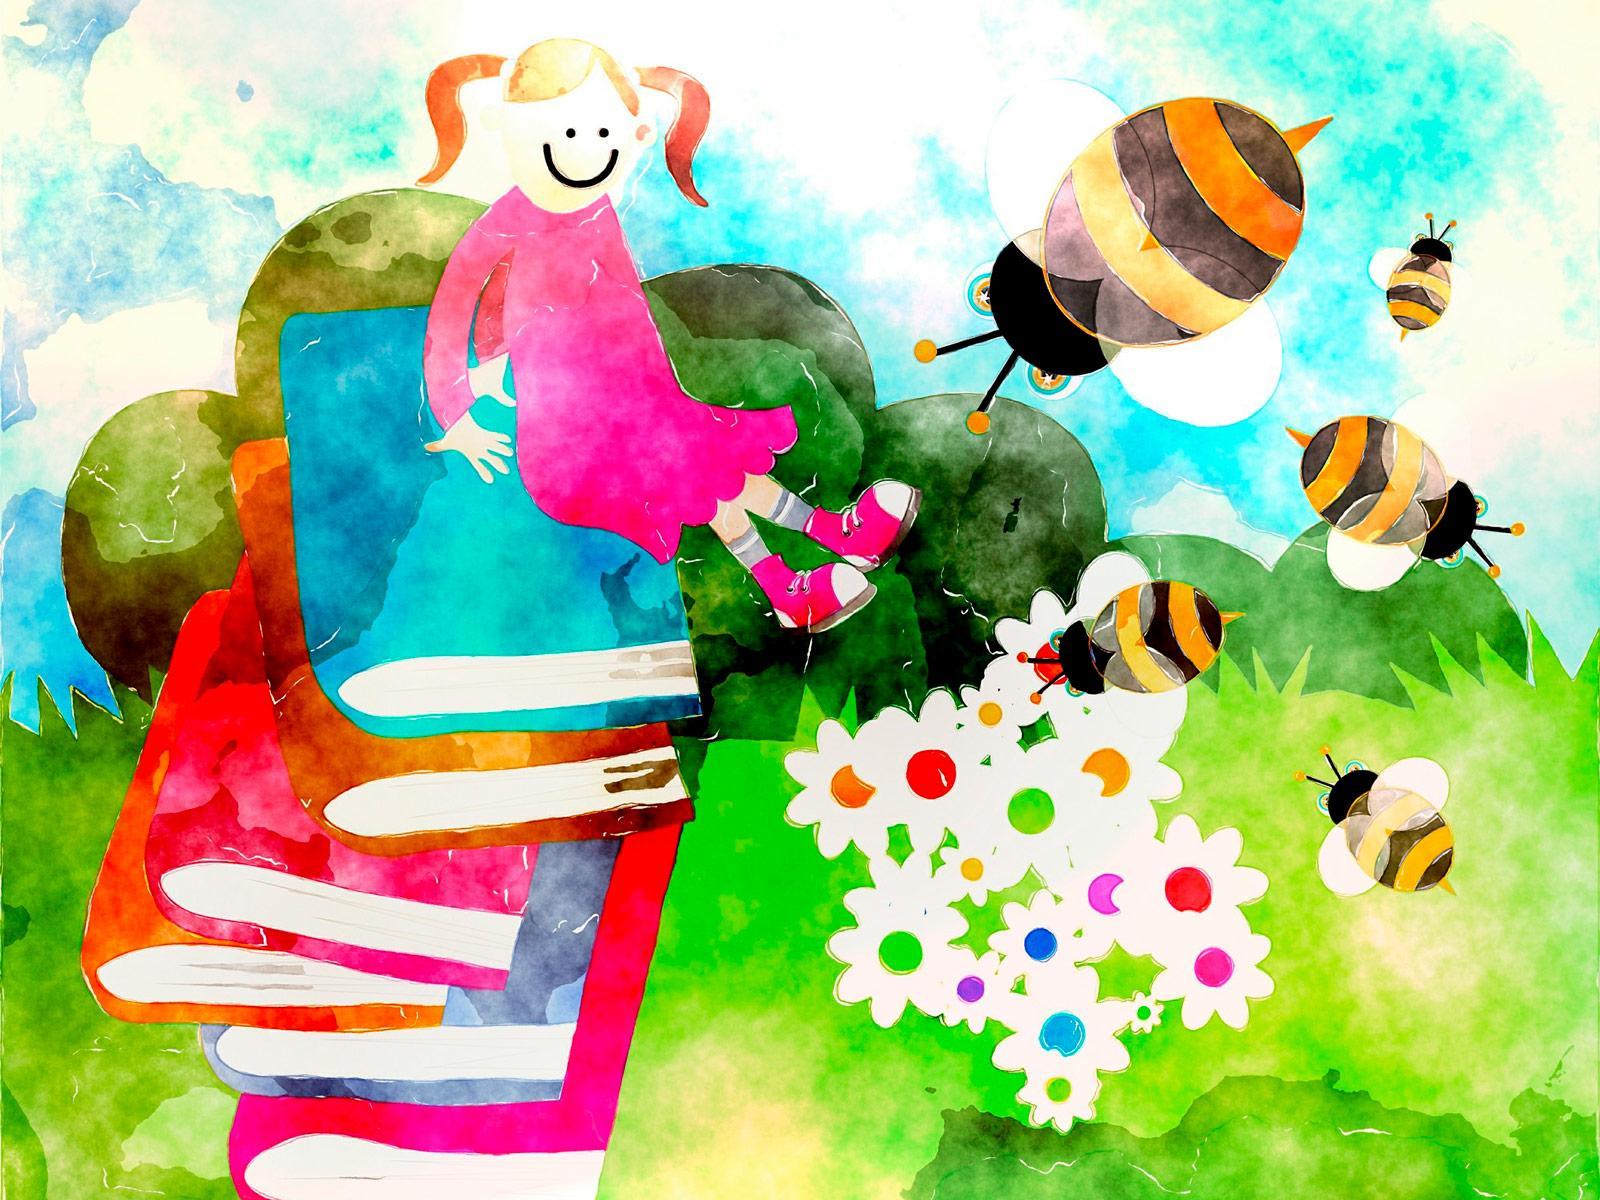 Illustration of a girl sitting on a stack of books in a meadow with bees flying around © Prawny/Pixabay